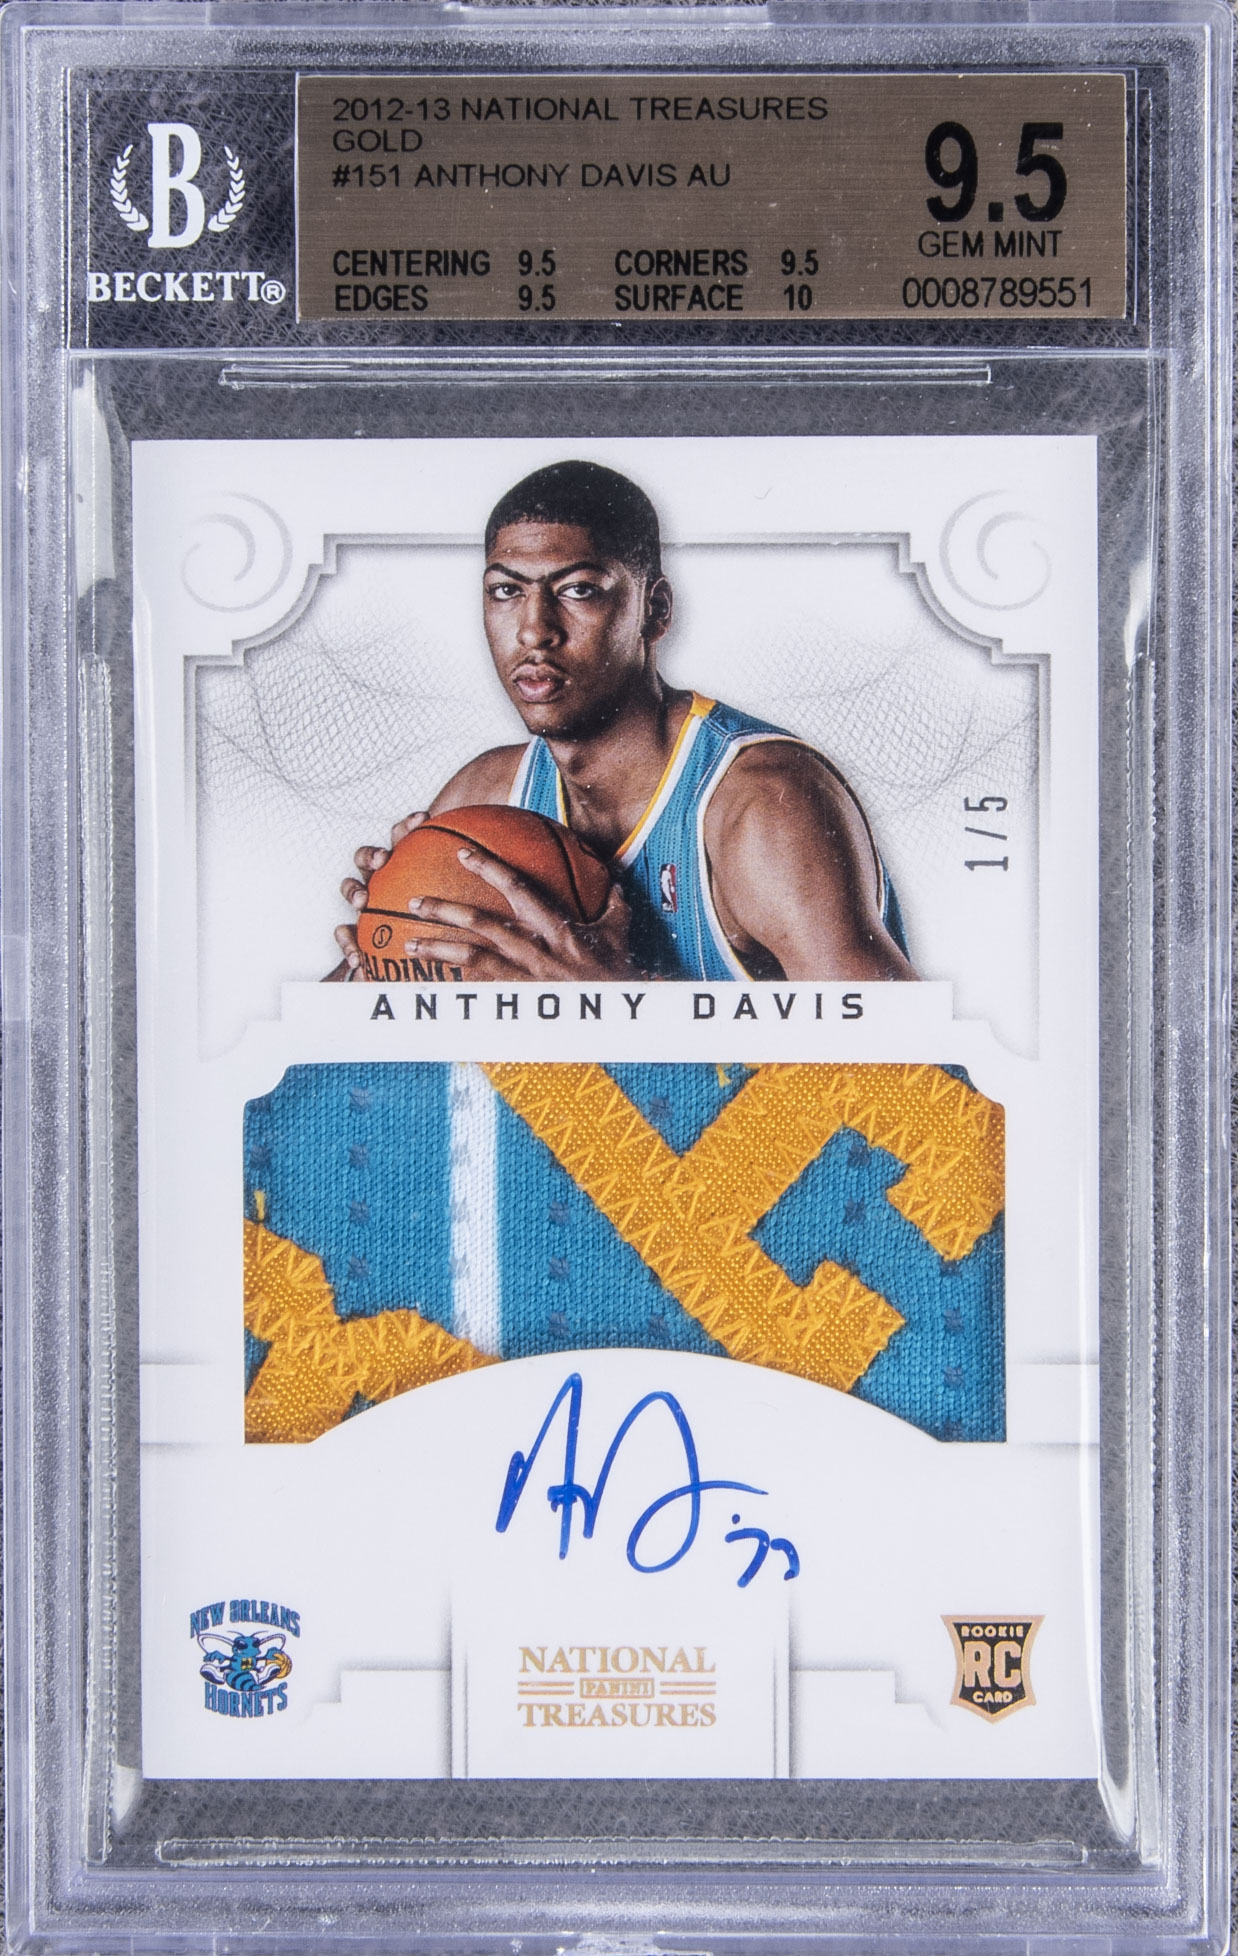 2012-13 Panini National Treasures Gold #151 Anthony Davis Signed Patch Rookie Card (#1/5) - BGS GEM MINT 9.5/BGS 10 - A "True Gem+" Example!